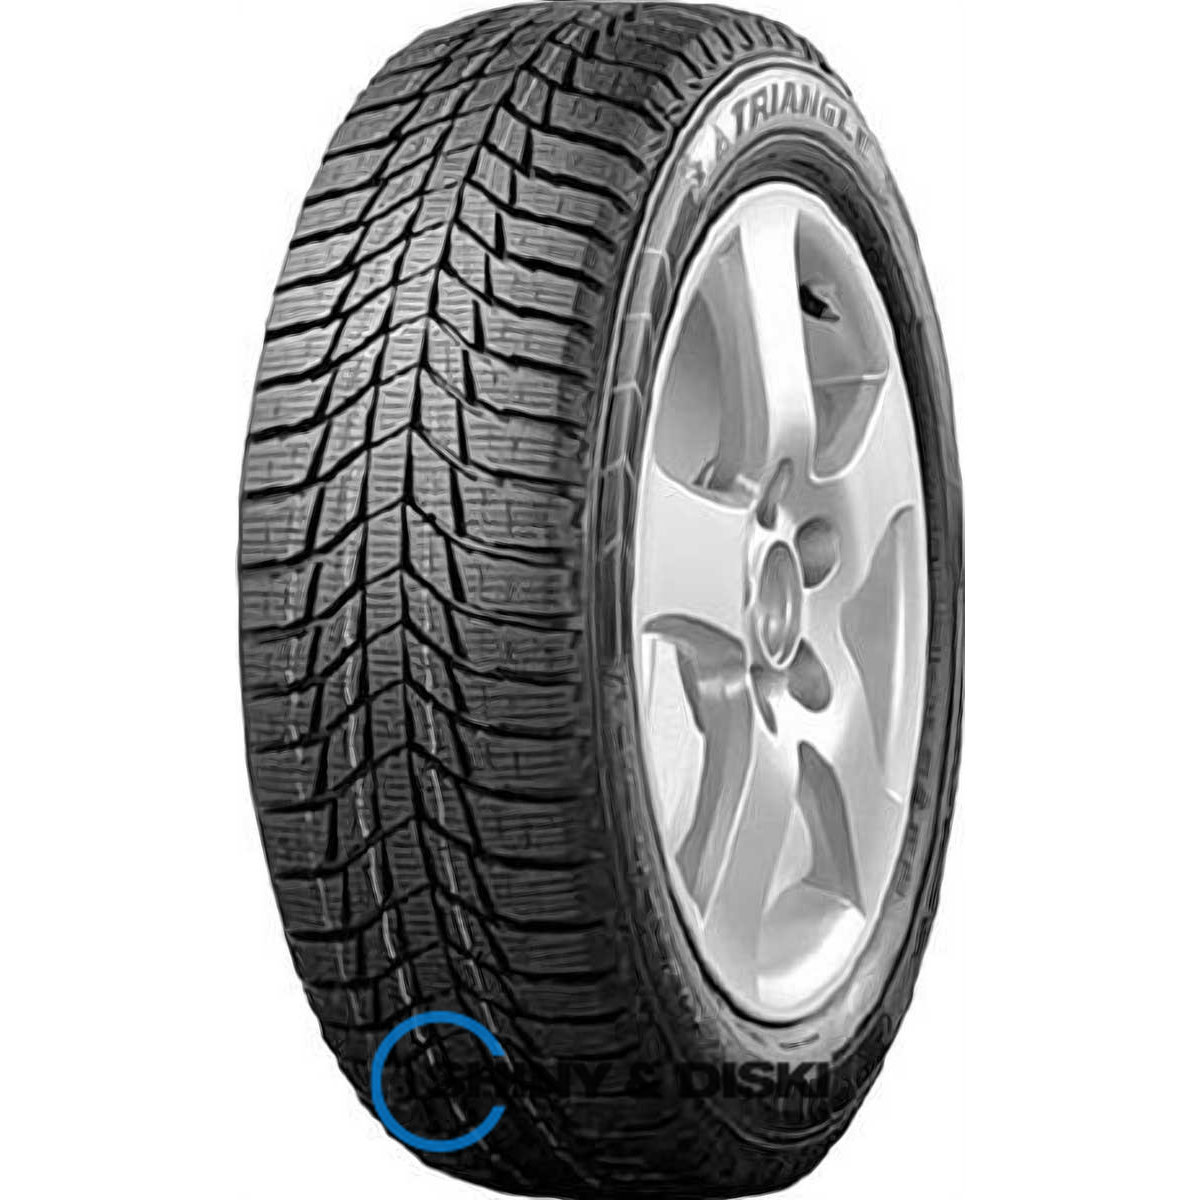 покрышки triangle pl01 205/60 r15 95r